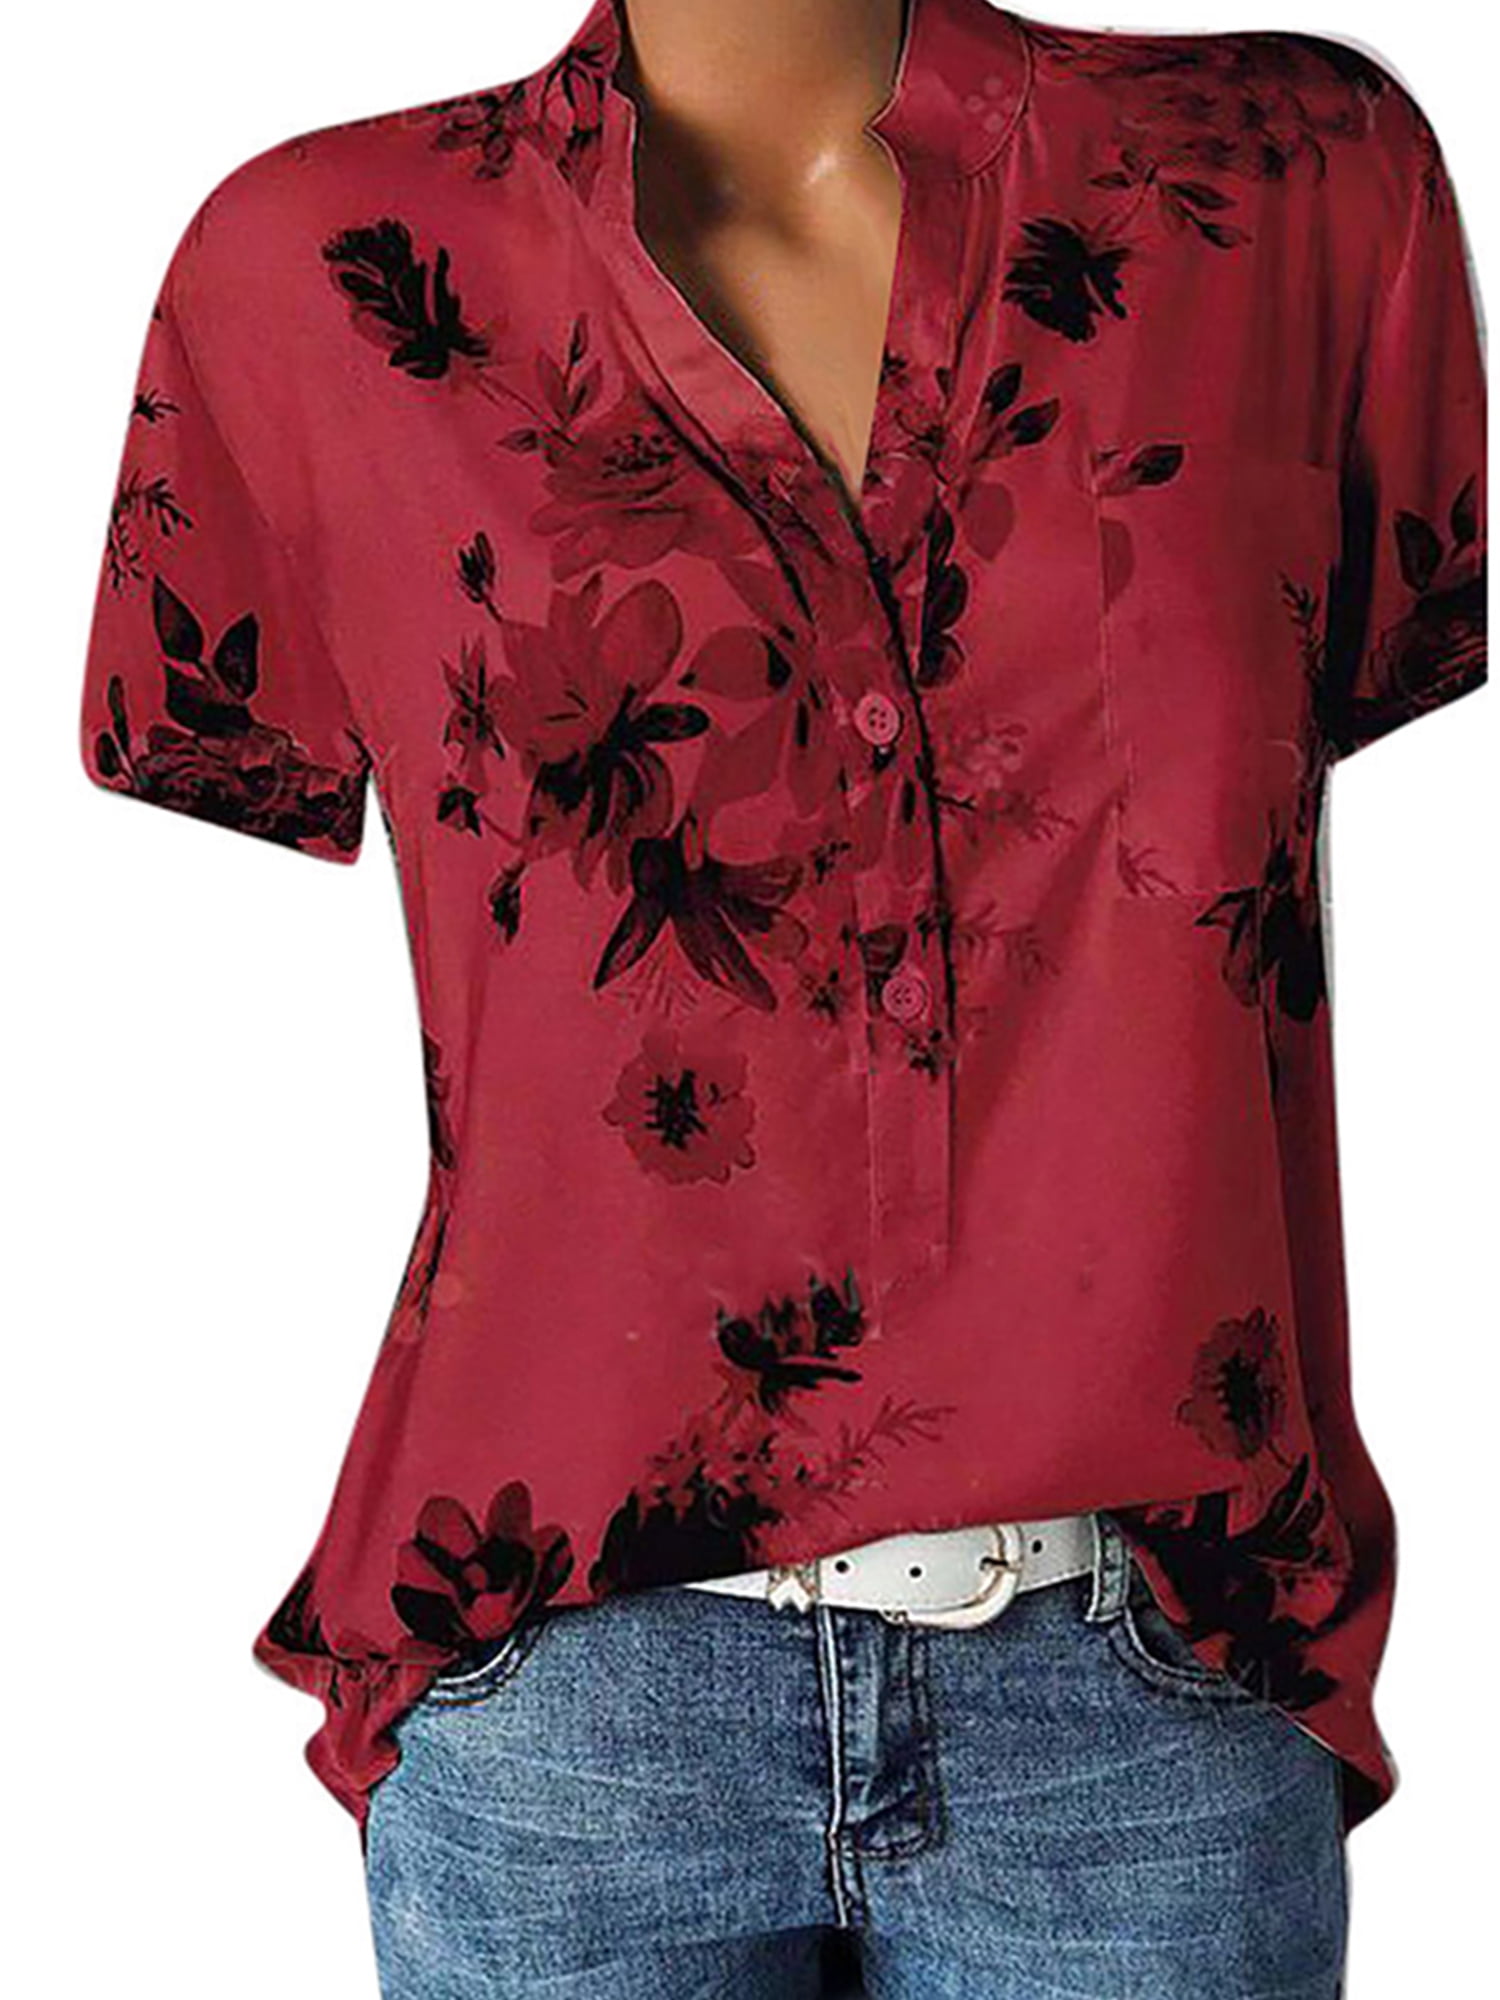 Women s Plus Size V Neck Floral Tops Short Sleeve Summer Loose T shirts ...